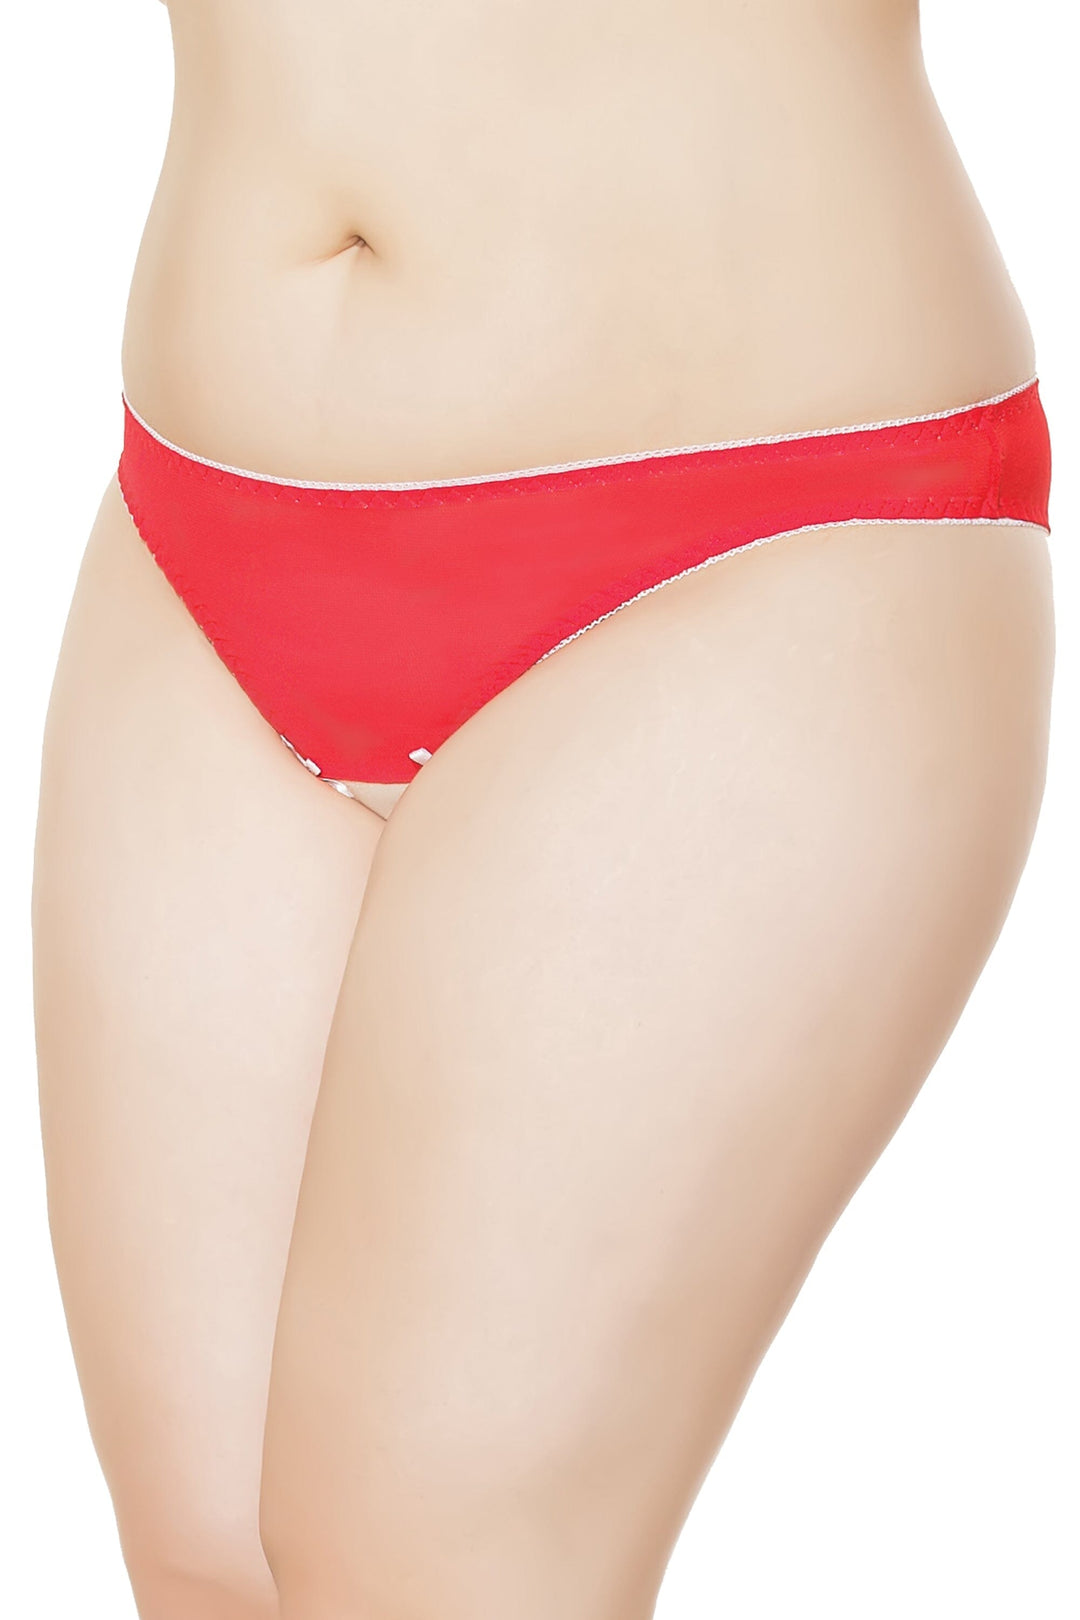 Gathered Mesh Panty With Santa Bells | Plus Size-Panties-Coquette-Red-Q-SEXYSHOES.COM